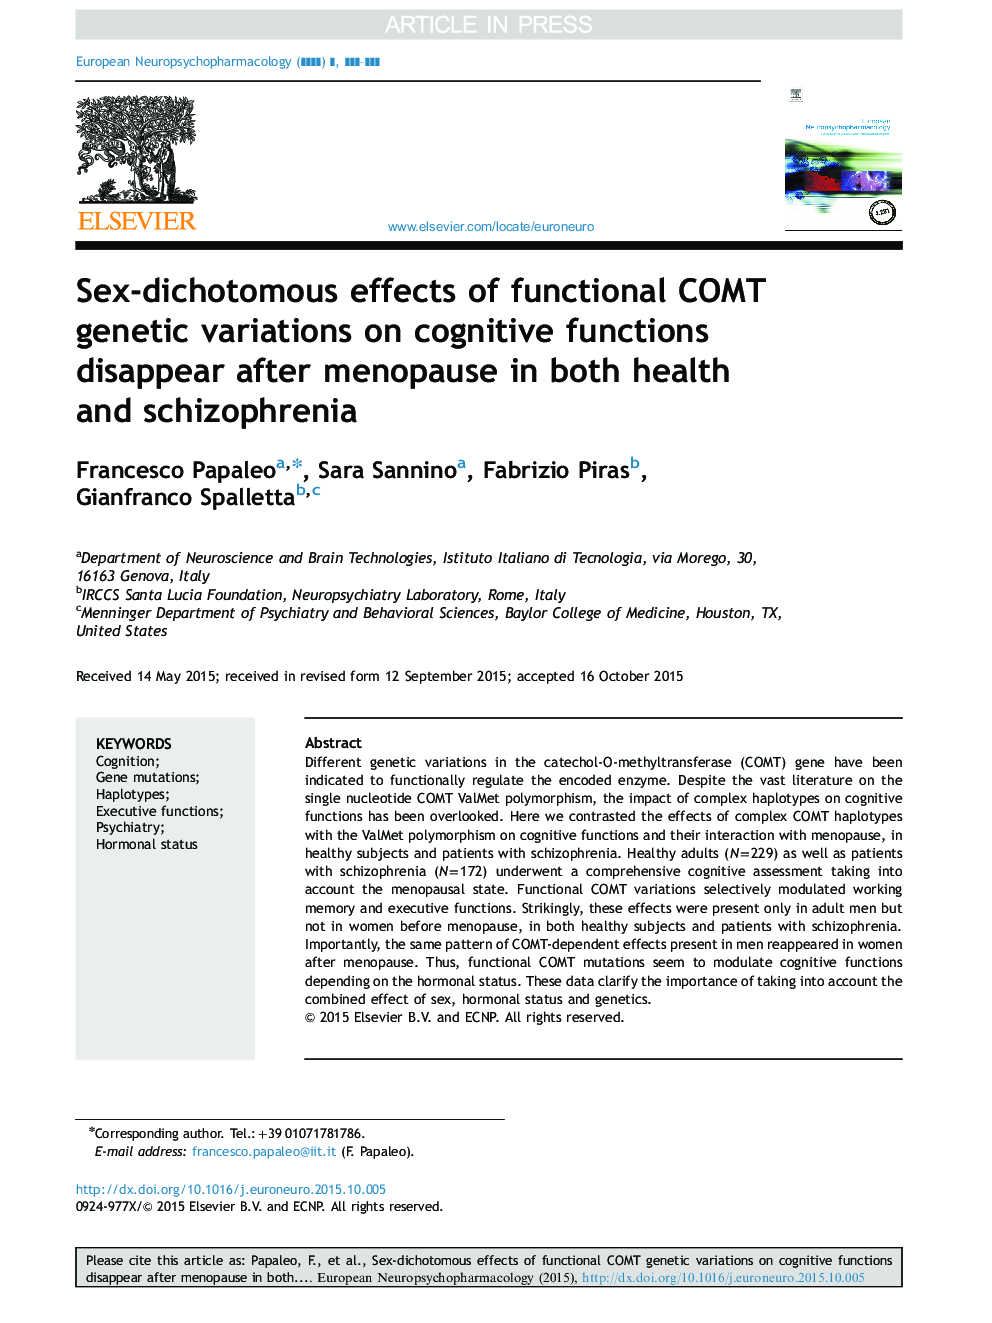 Sex-dichotomous effects of functional COMT genetic variations on cognitive functions disappear after menopause in both health and schizophrenia